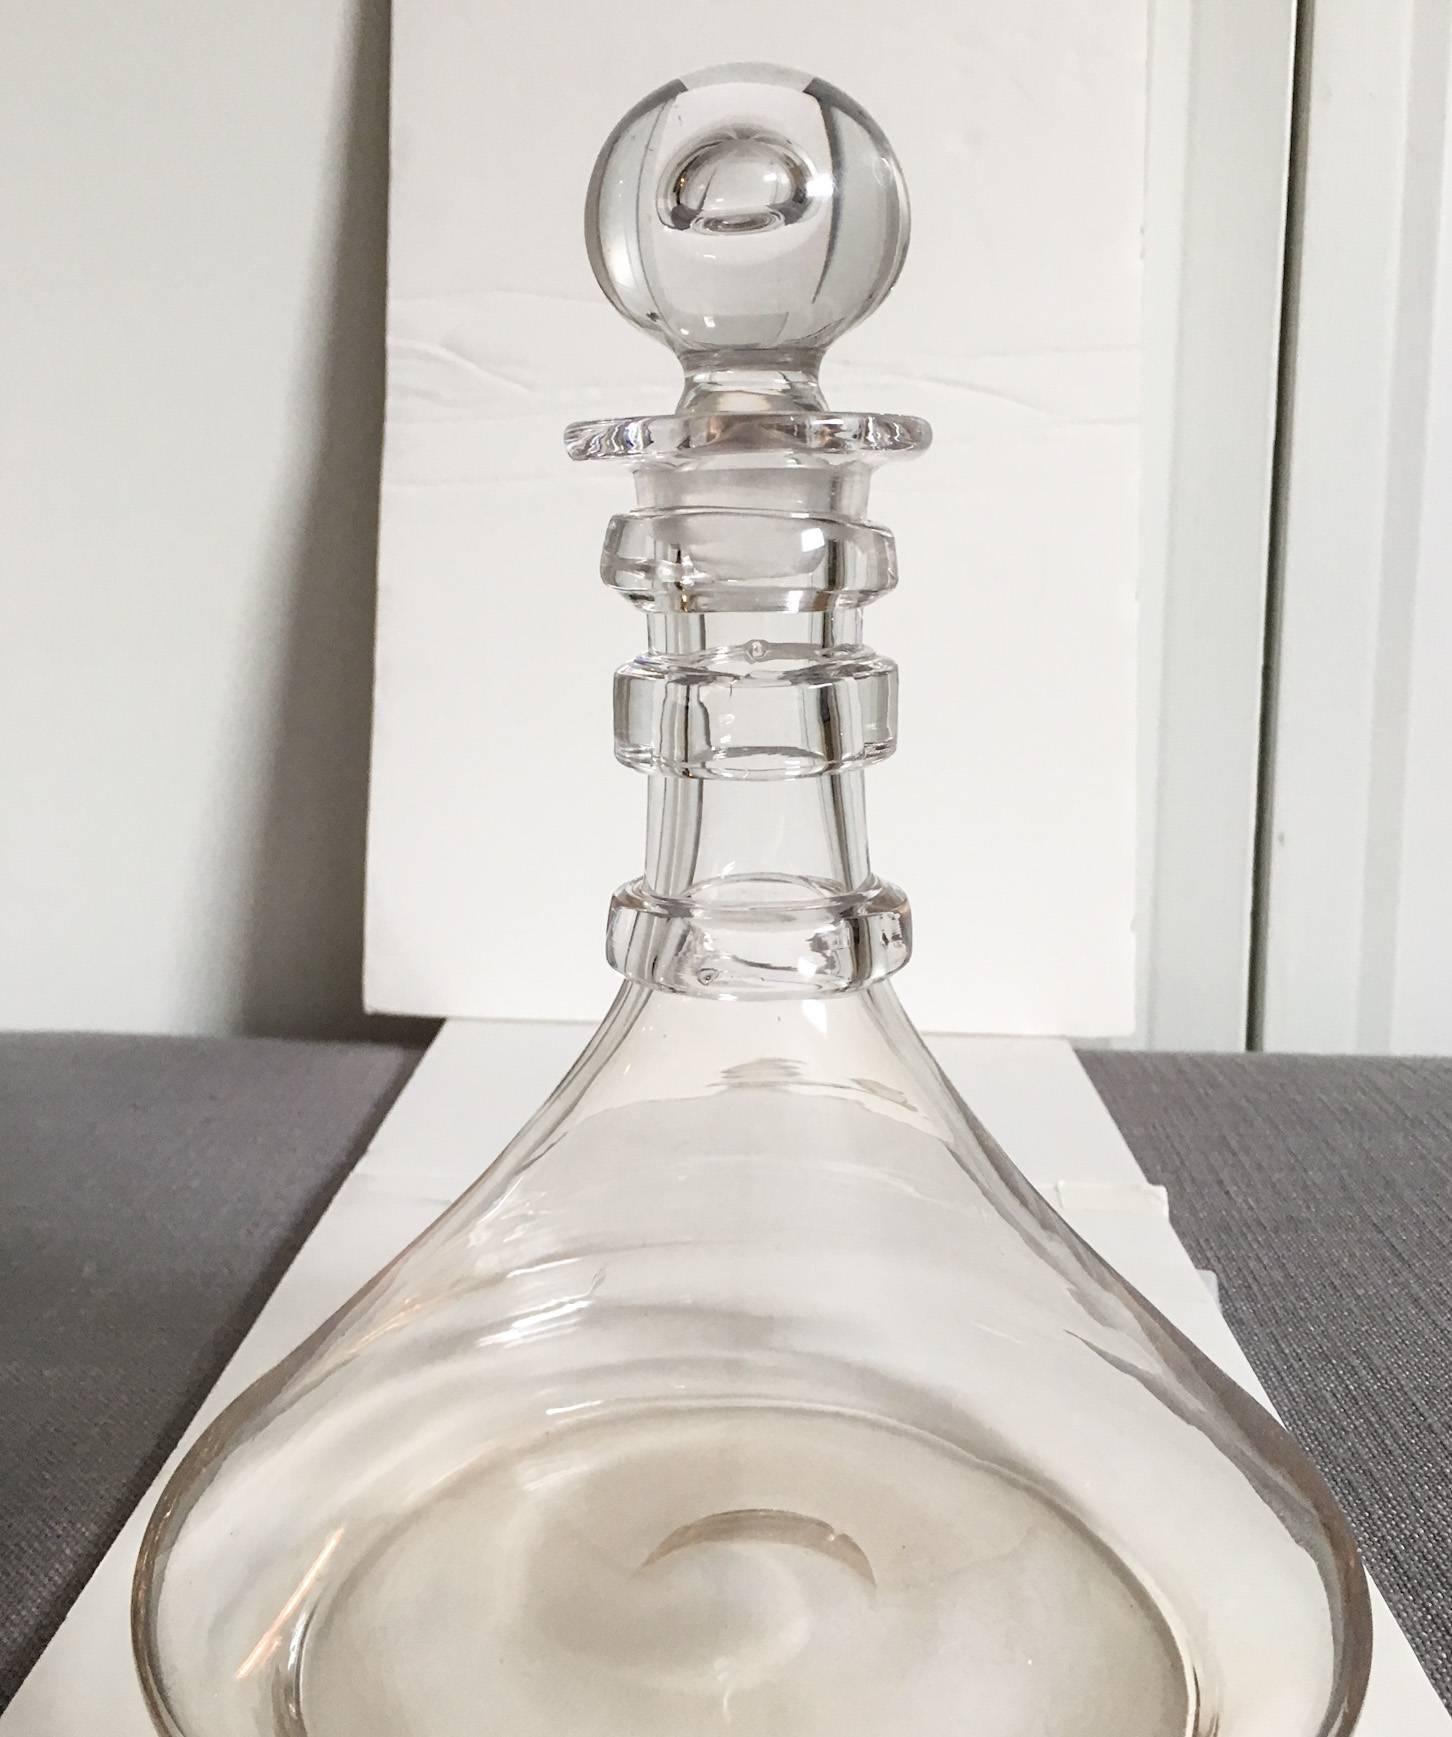 Exquisite blown crystal clear glass decanter in the manner of the American glass firm Steuben with a pontil mark. Decanter has three thick rings around the neck and an unusual air bubble stopper. The underside of the stopper and decanter are both